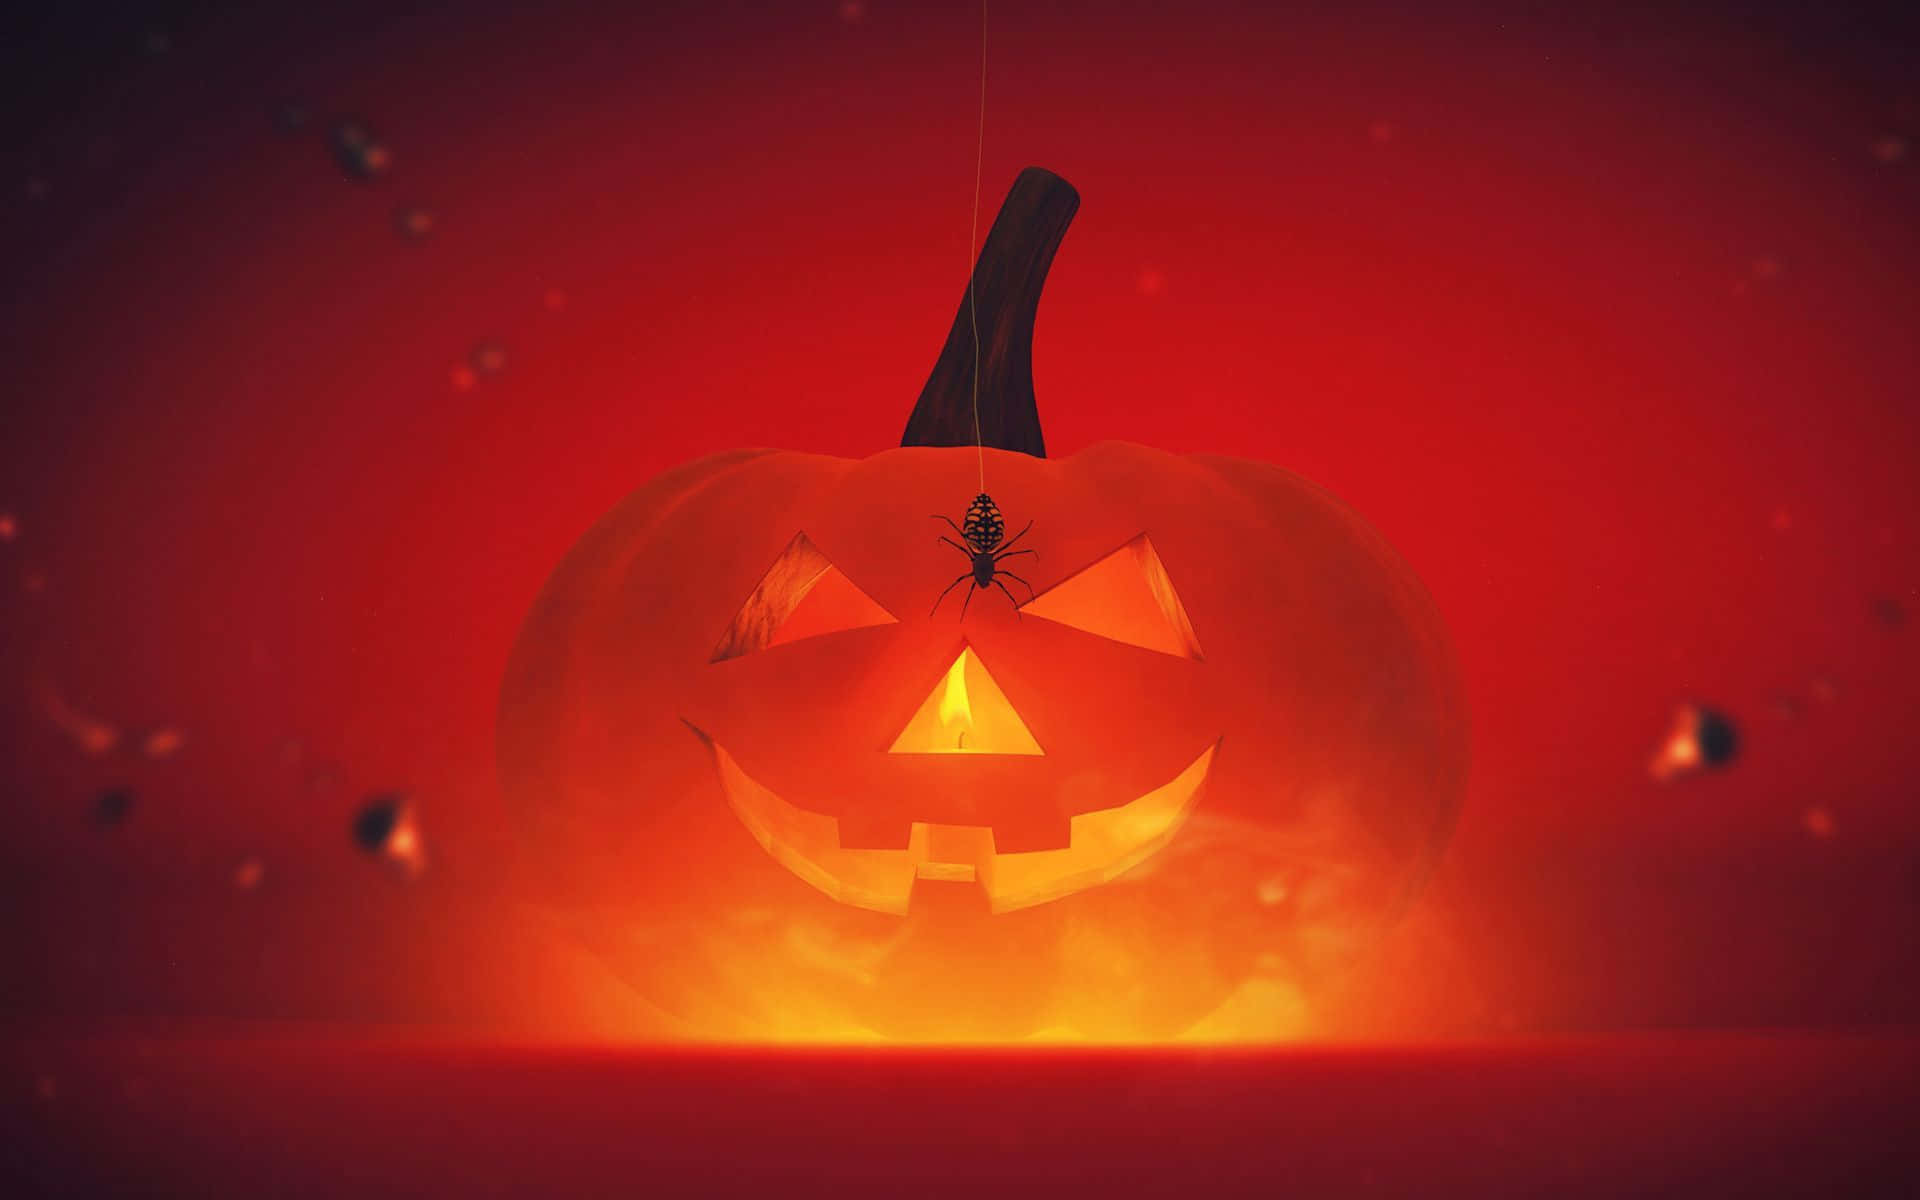 Get Into The Spooky Spirit With This Funny Halloween Wallpaper! Background